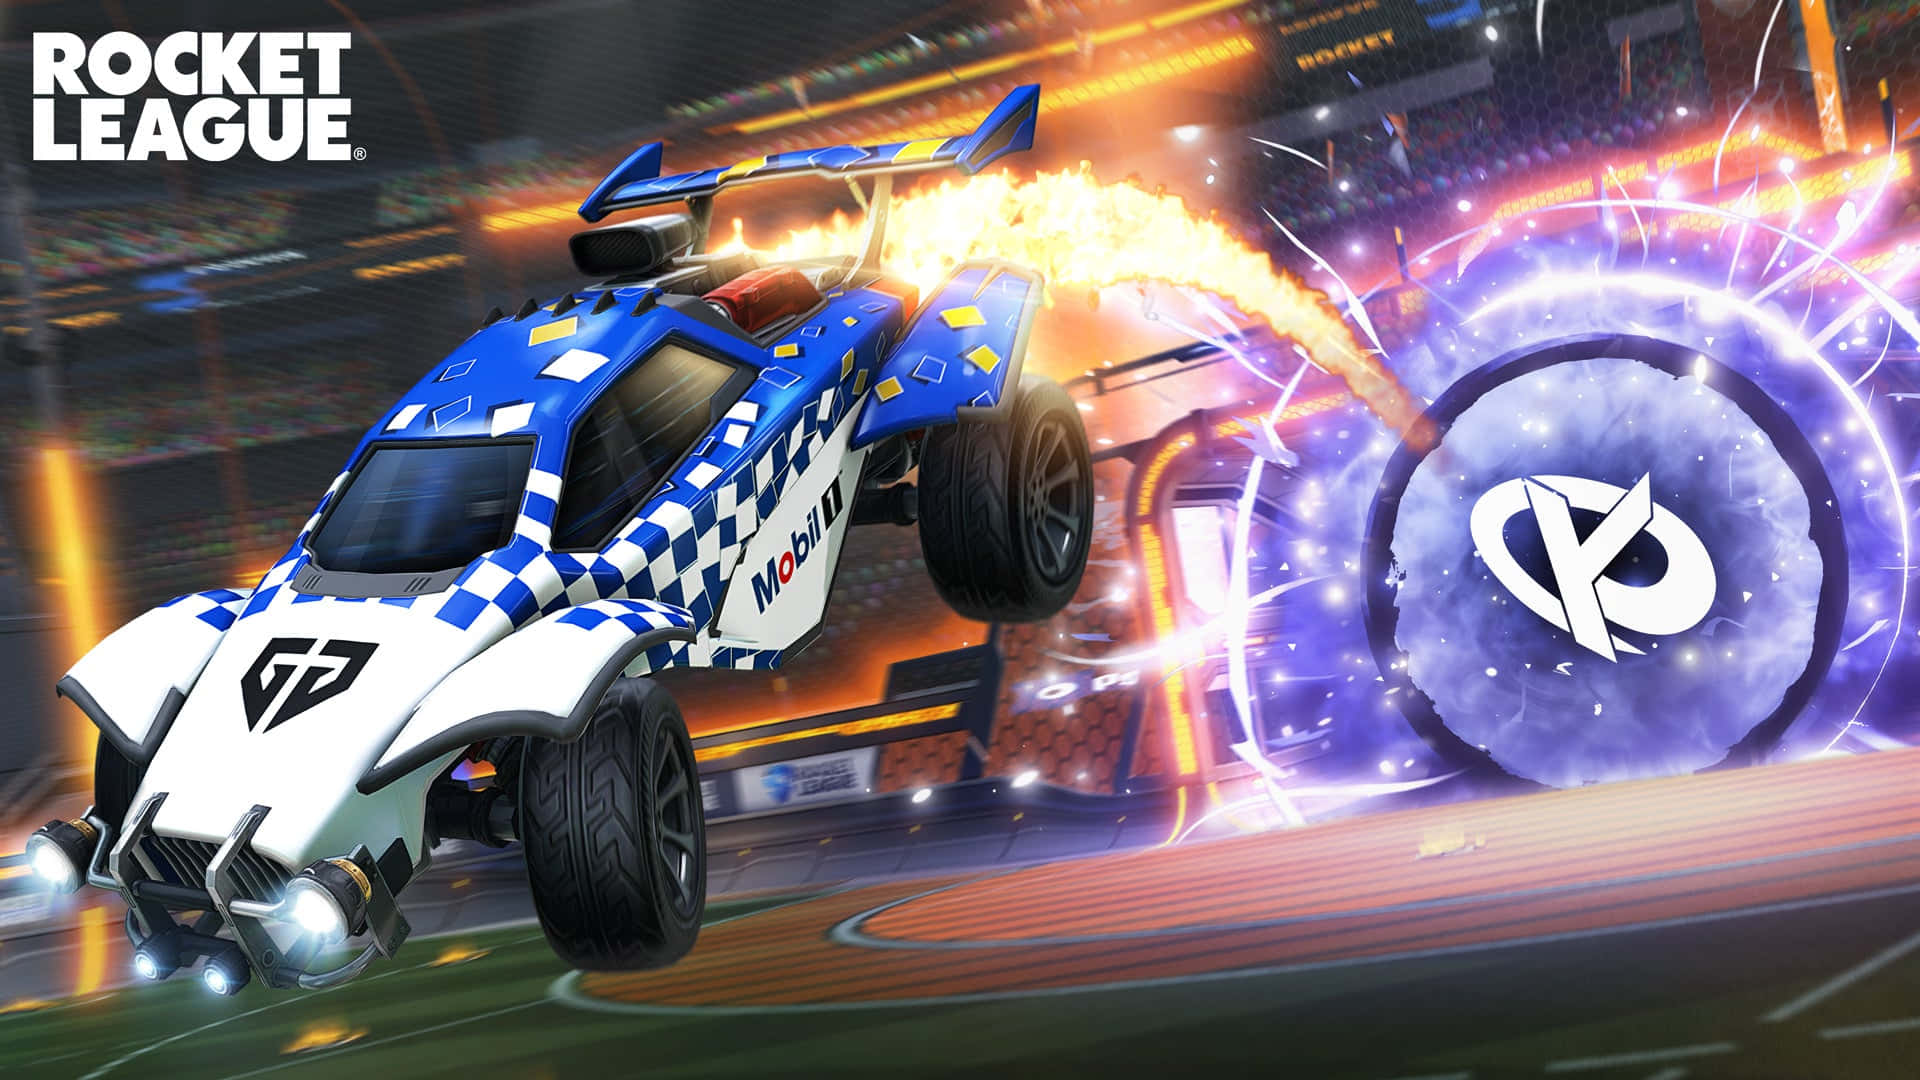 Experience the thrill of Rocket League